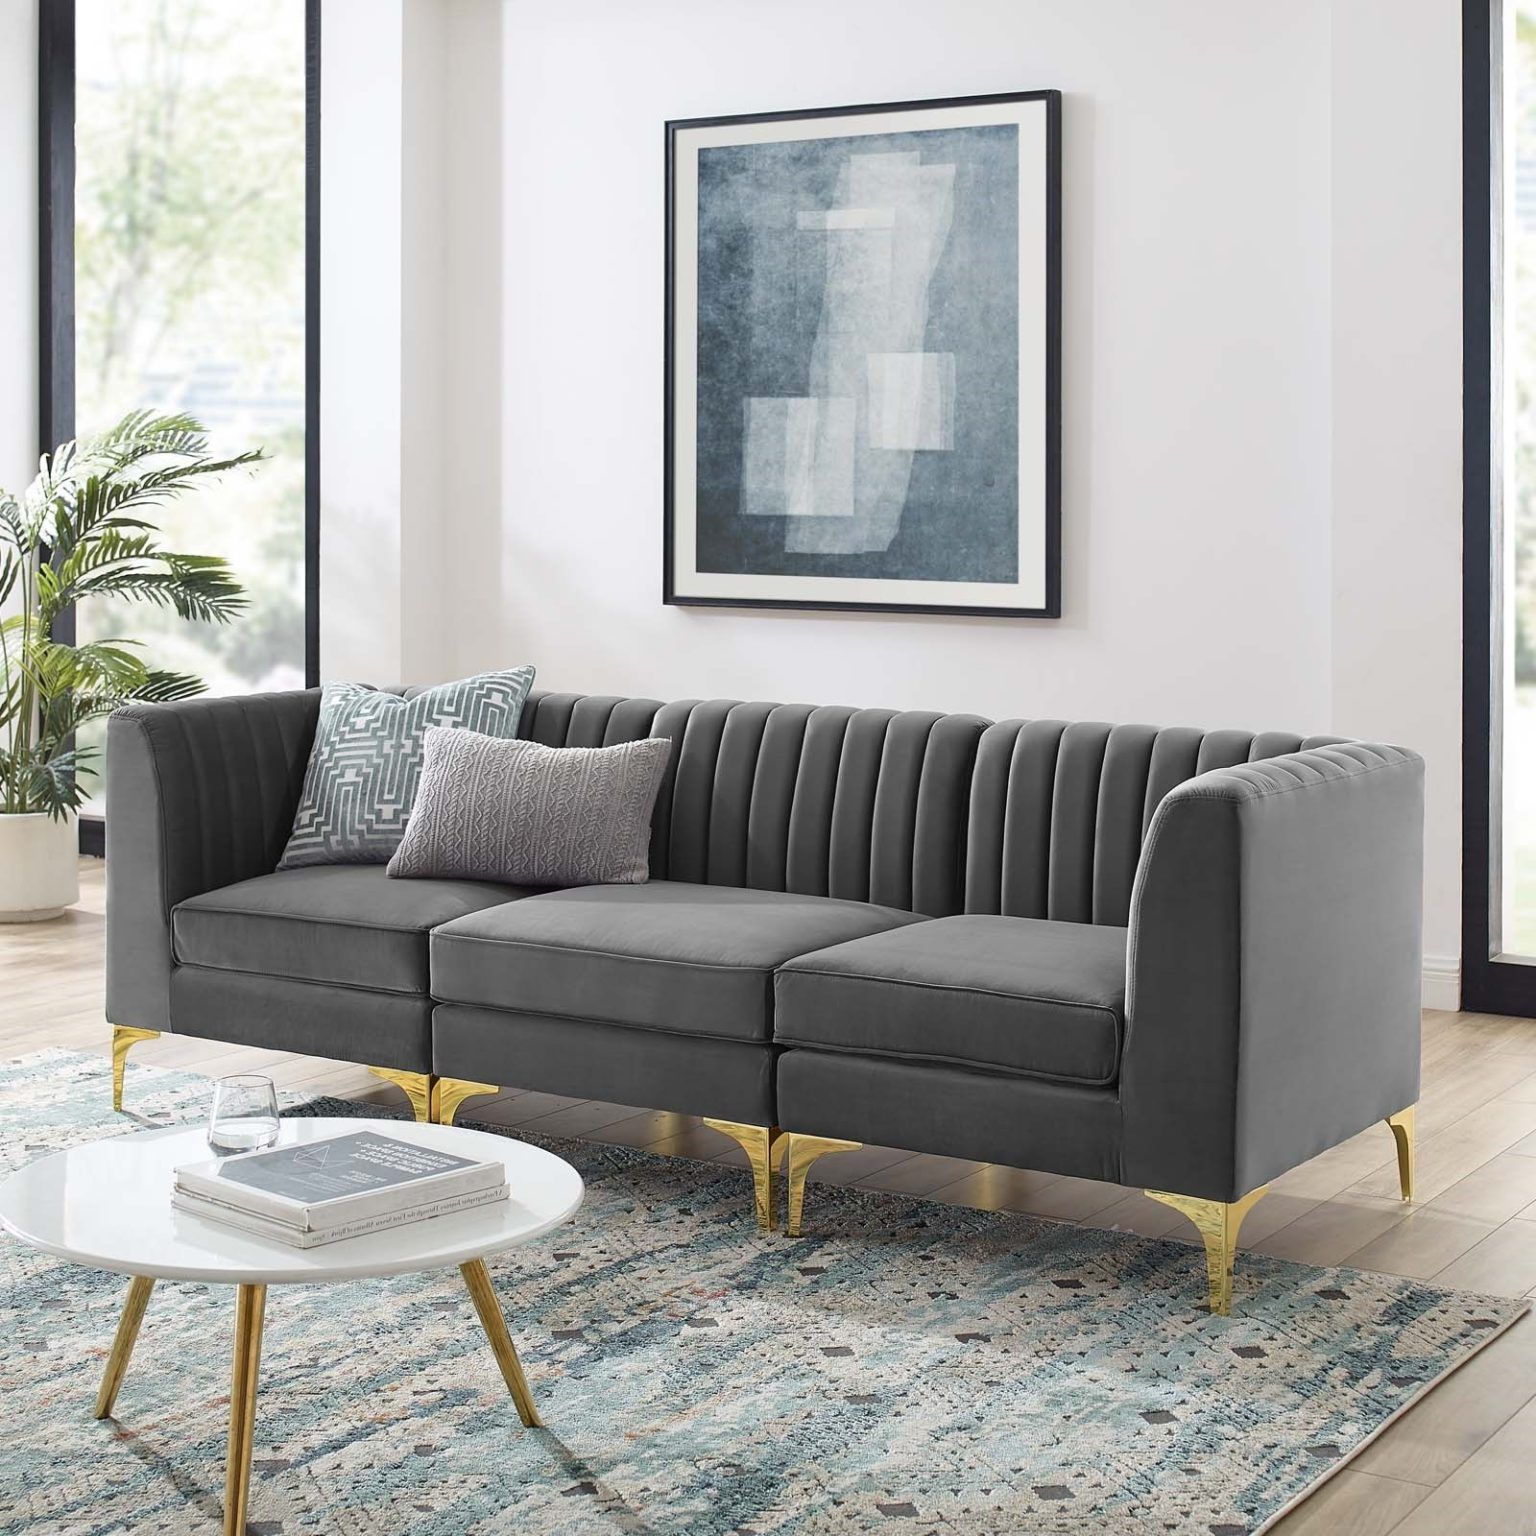 2018 Tufted Upholstered Sofas Inside Triumph Channel Tufted Performance Velvet 3 Seater Sofa In Gray – Hyme (View 5 of 15)